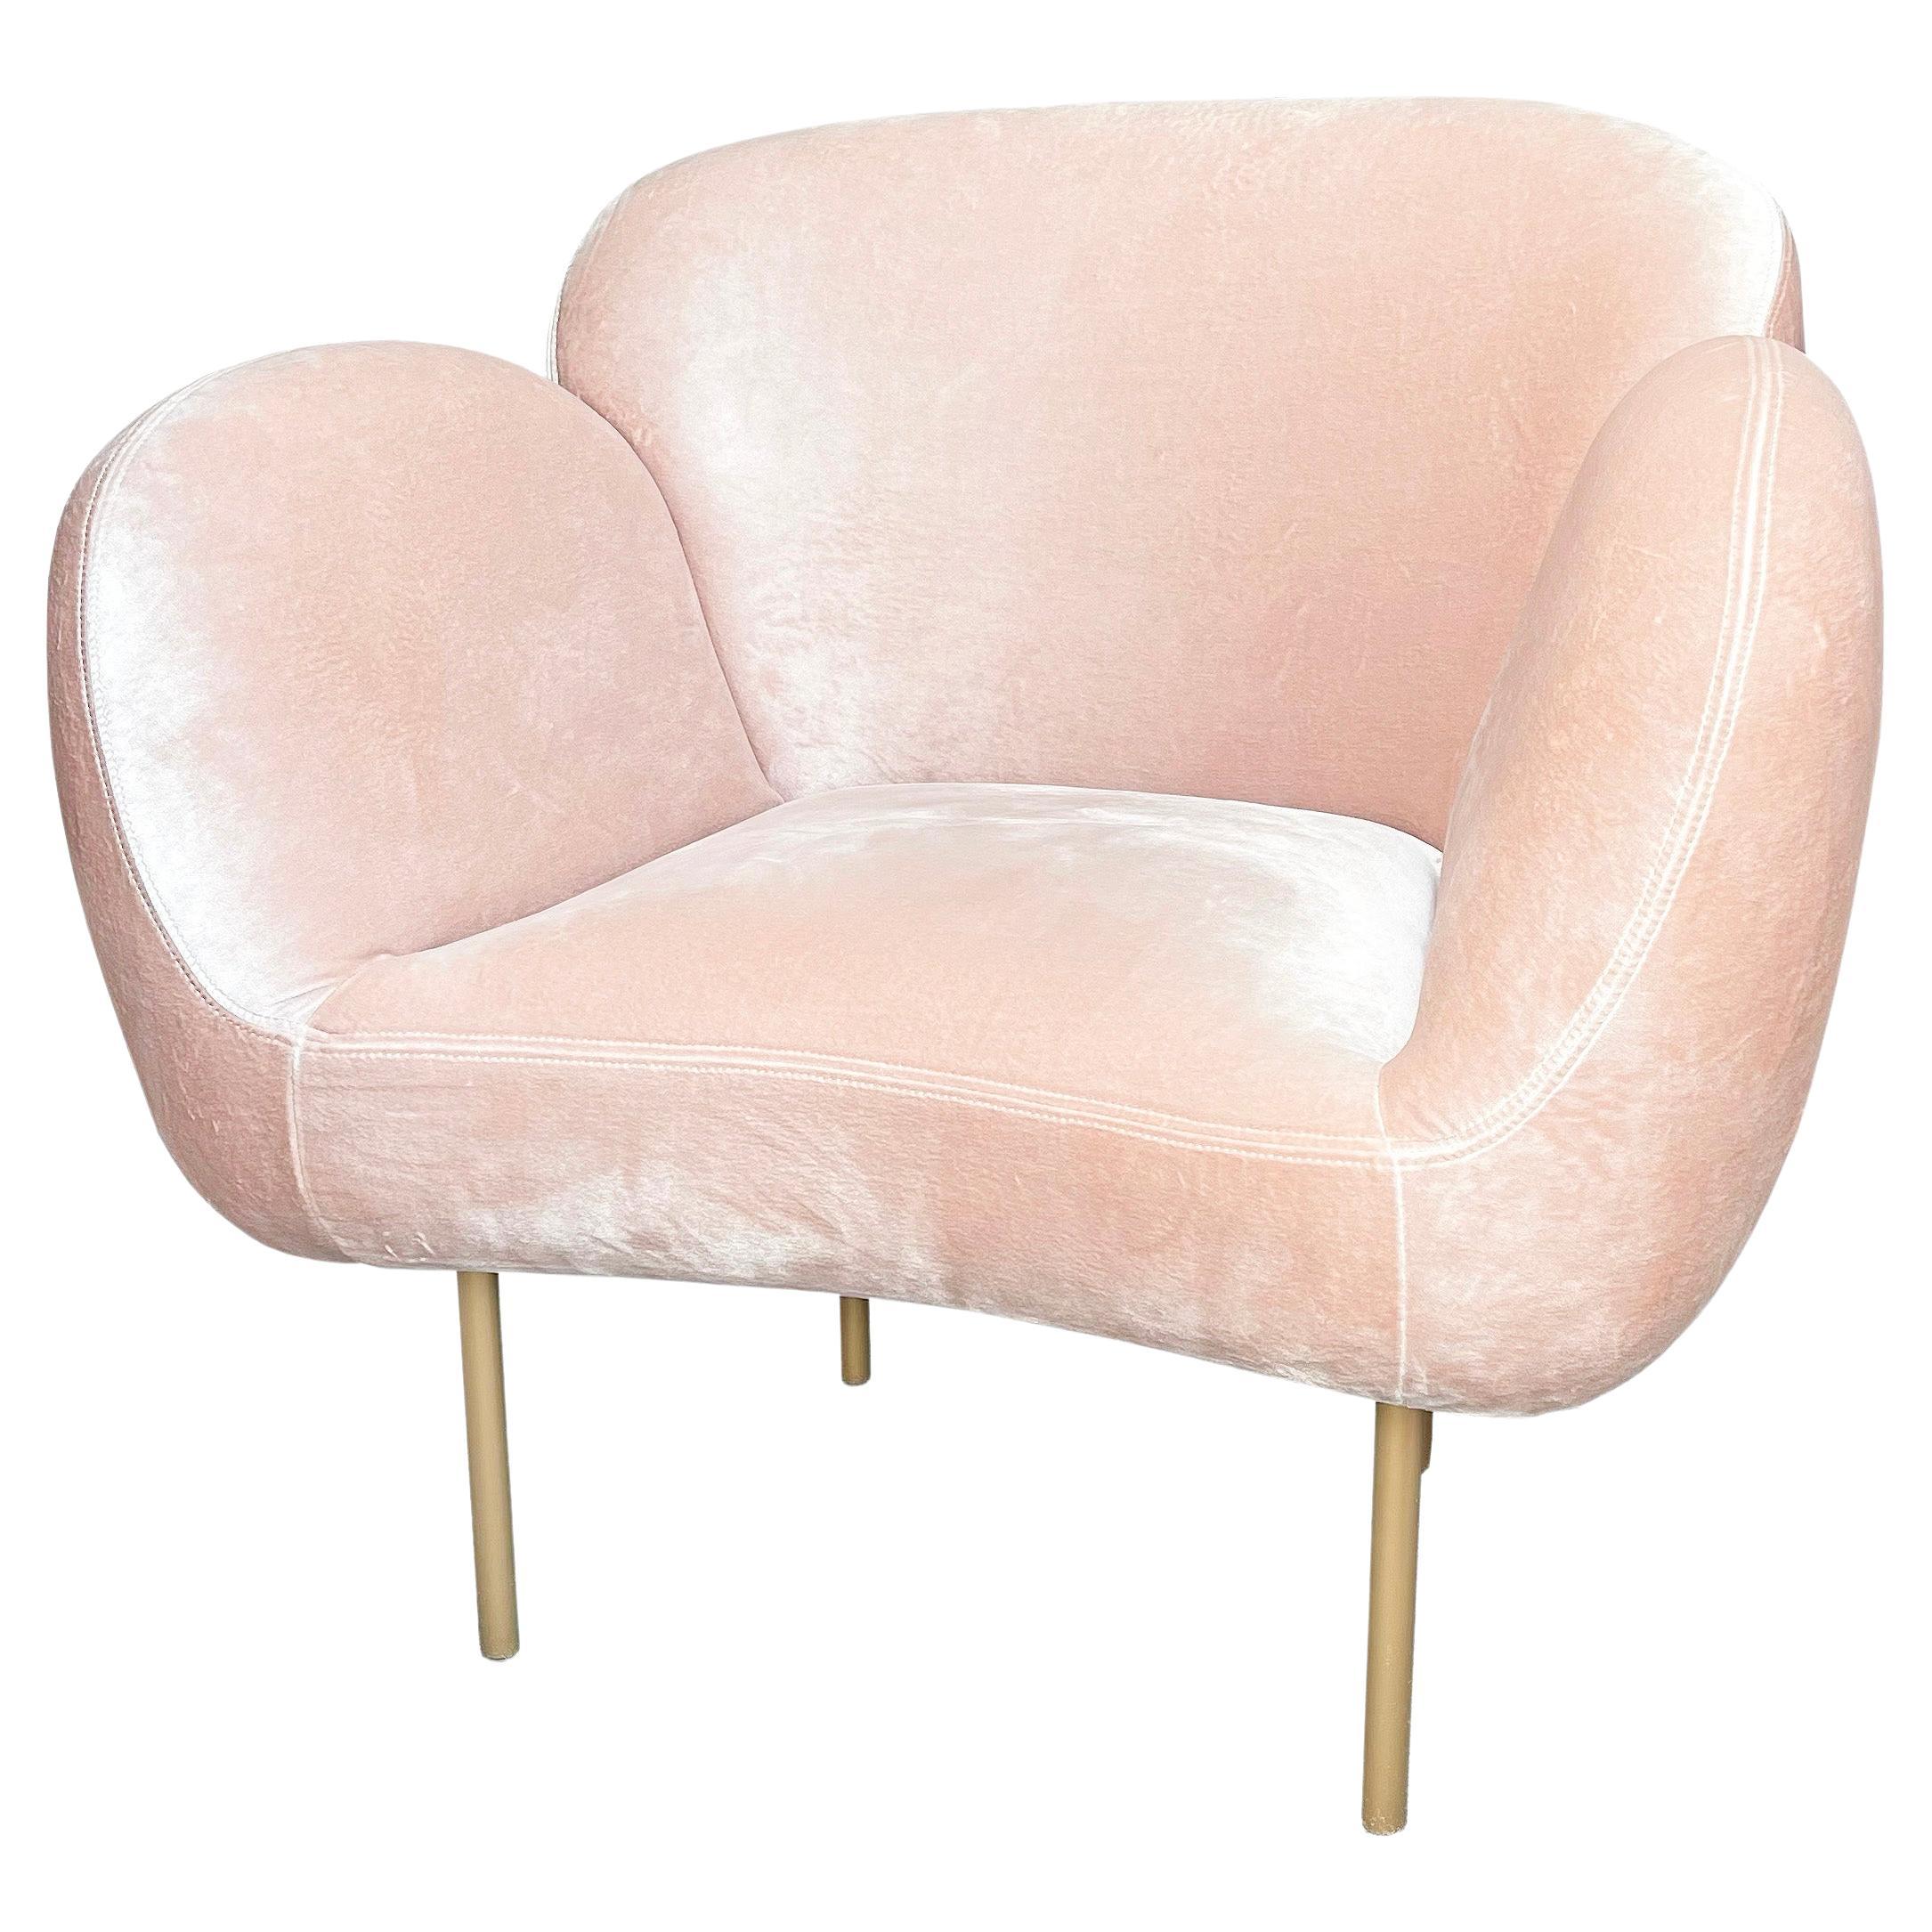 Contemporary Pink Suede Upholstered Armchair, Stardust Armchair by Nika Zupanc